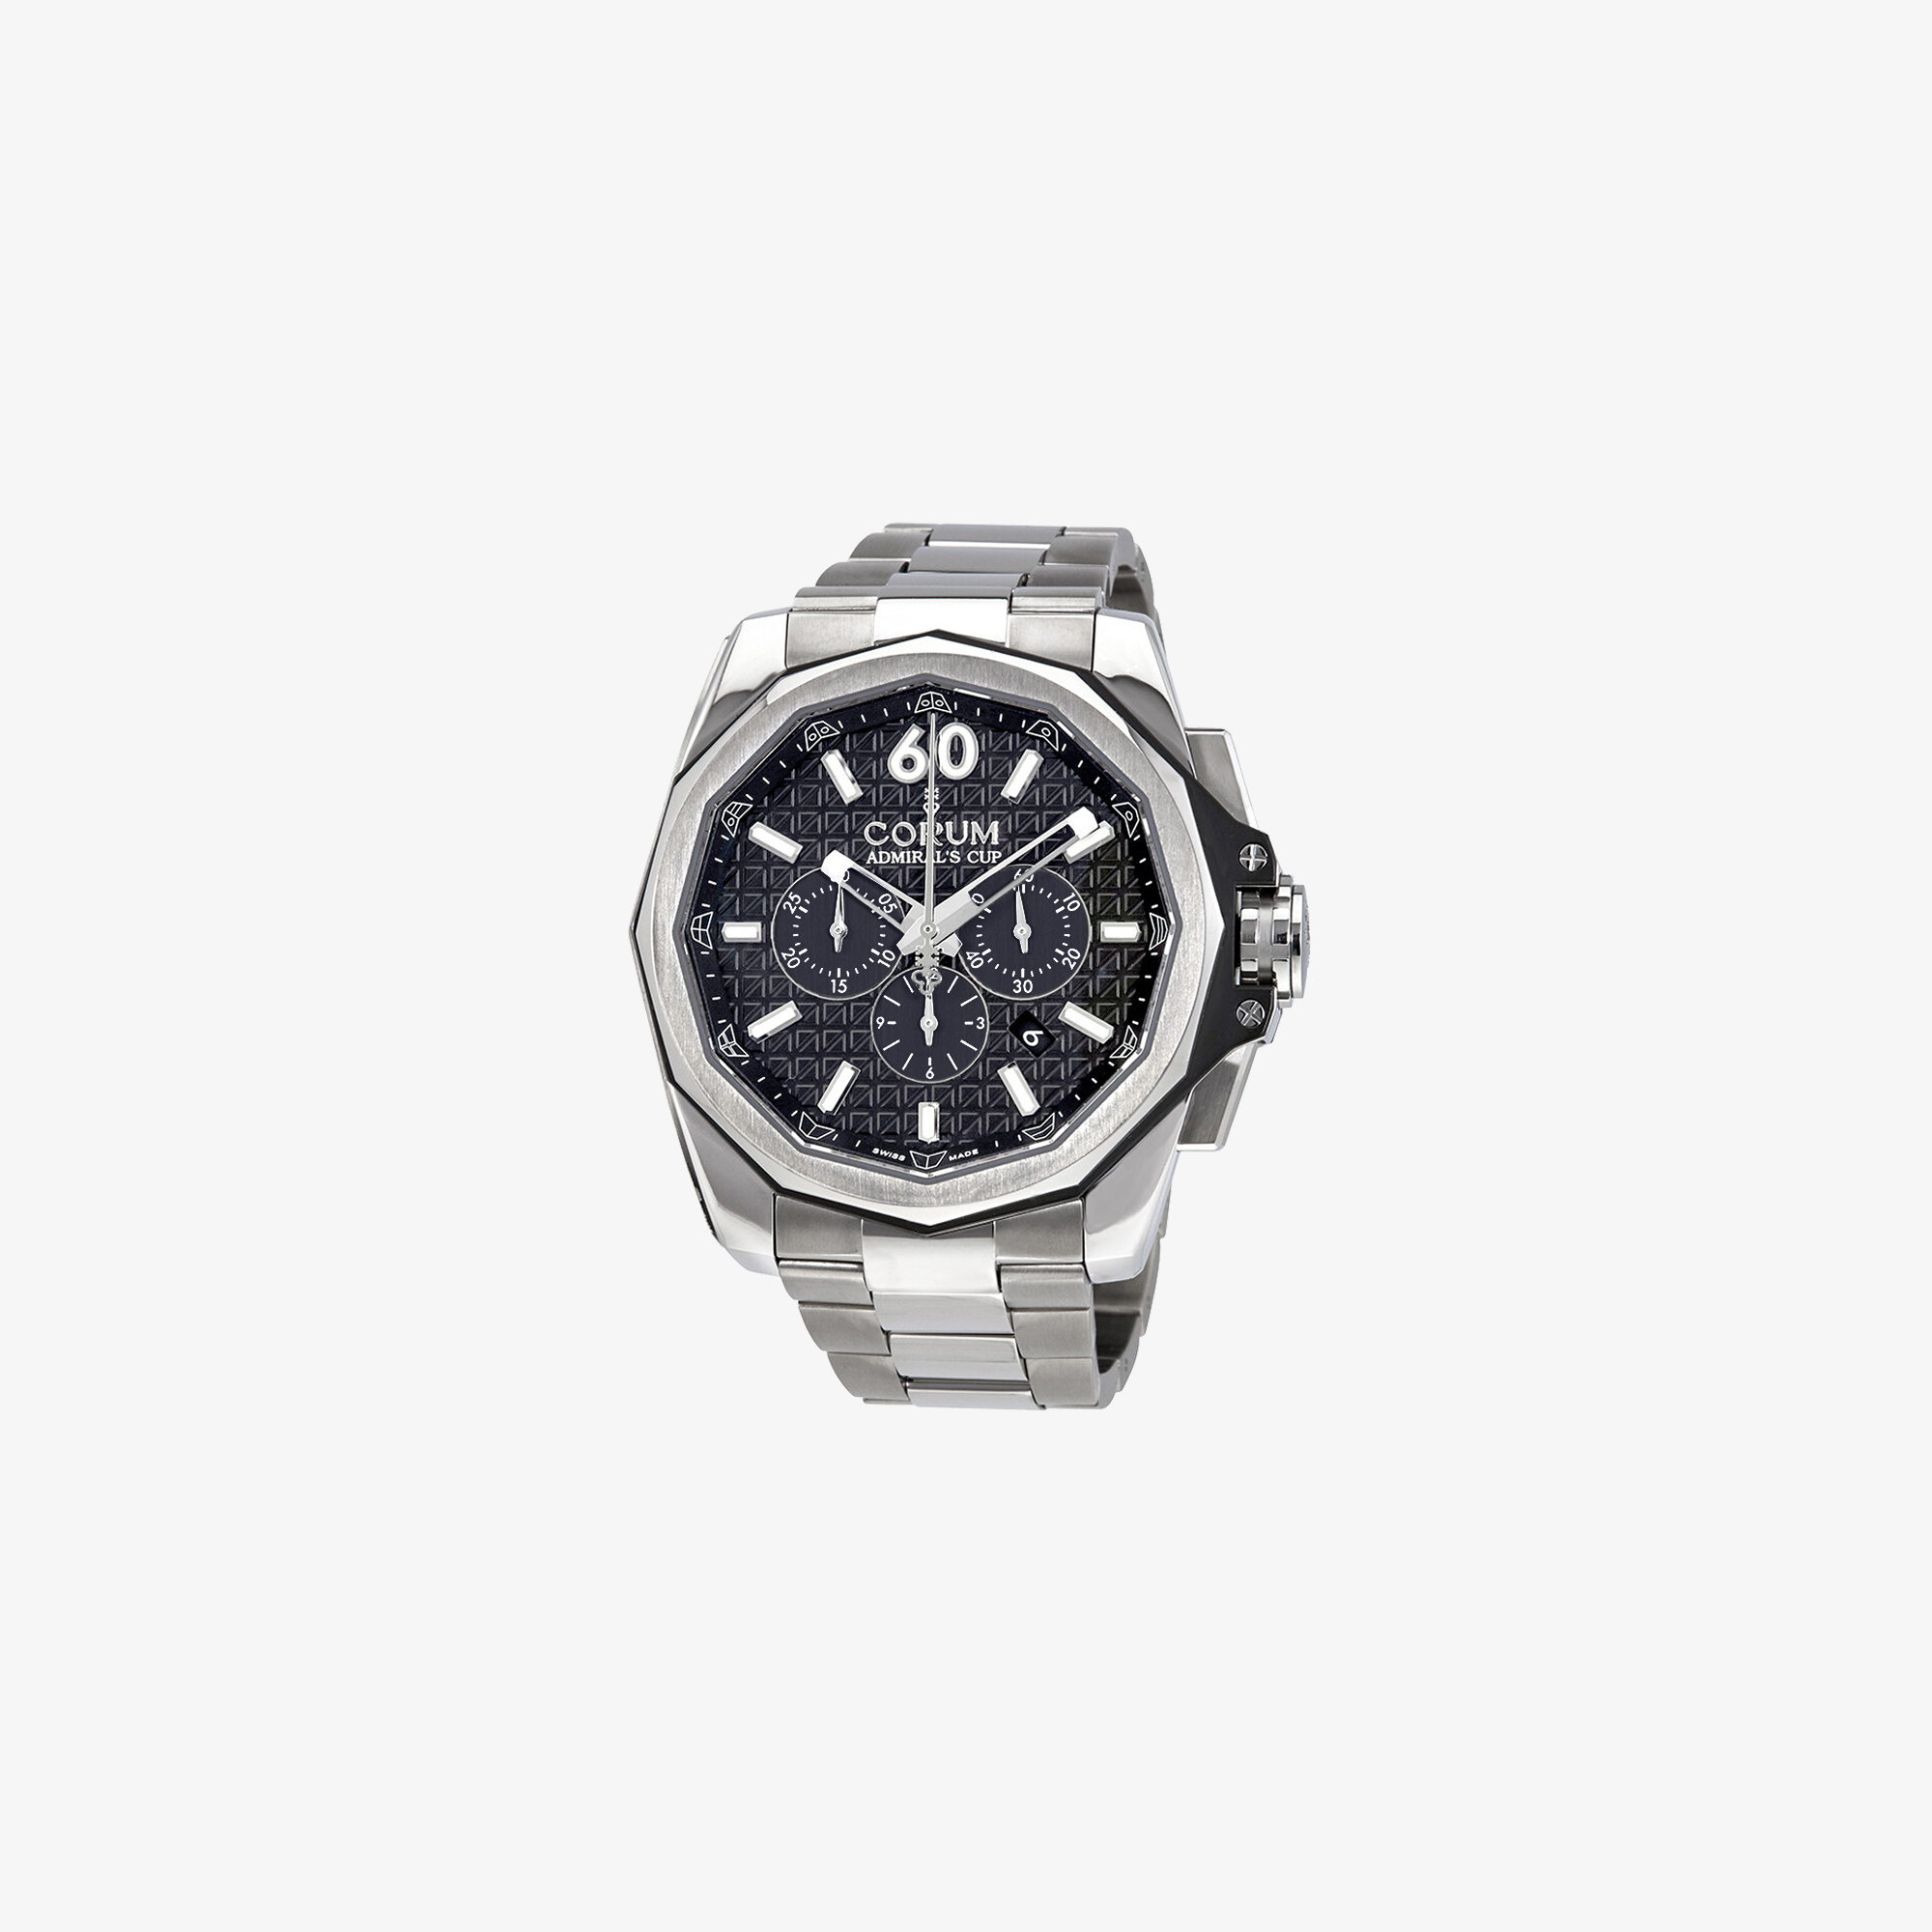 CORUM ADMIRAL'S CUP AC-ONE CHRONOGRAPH